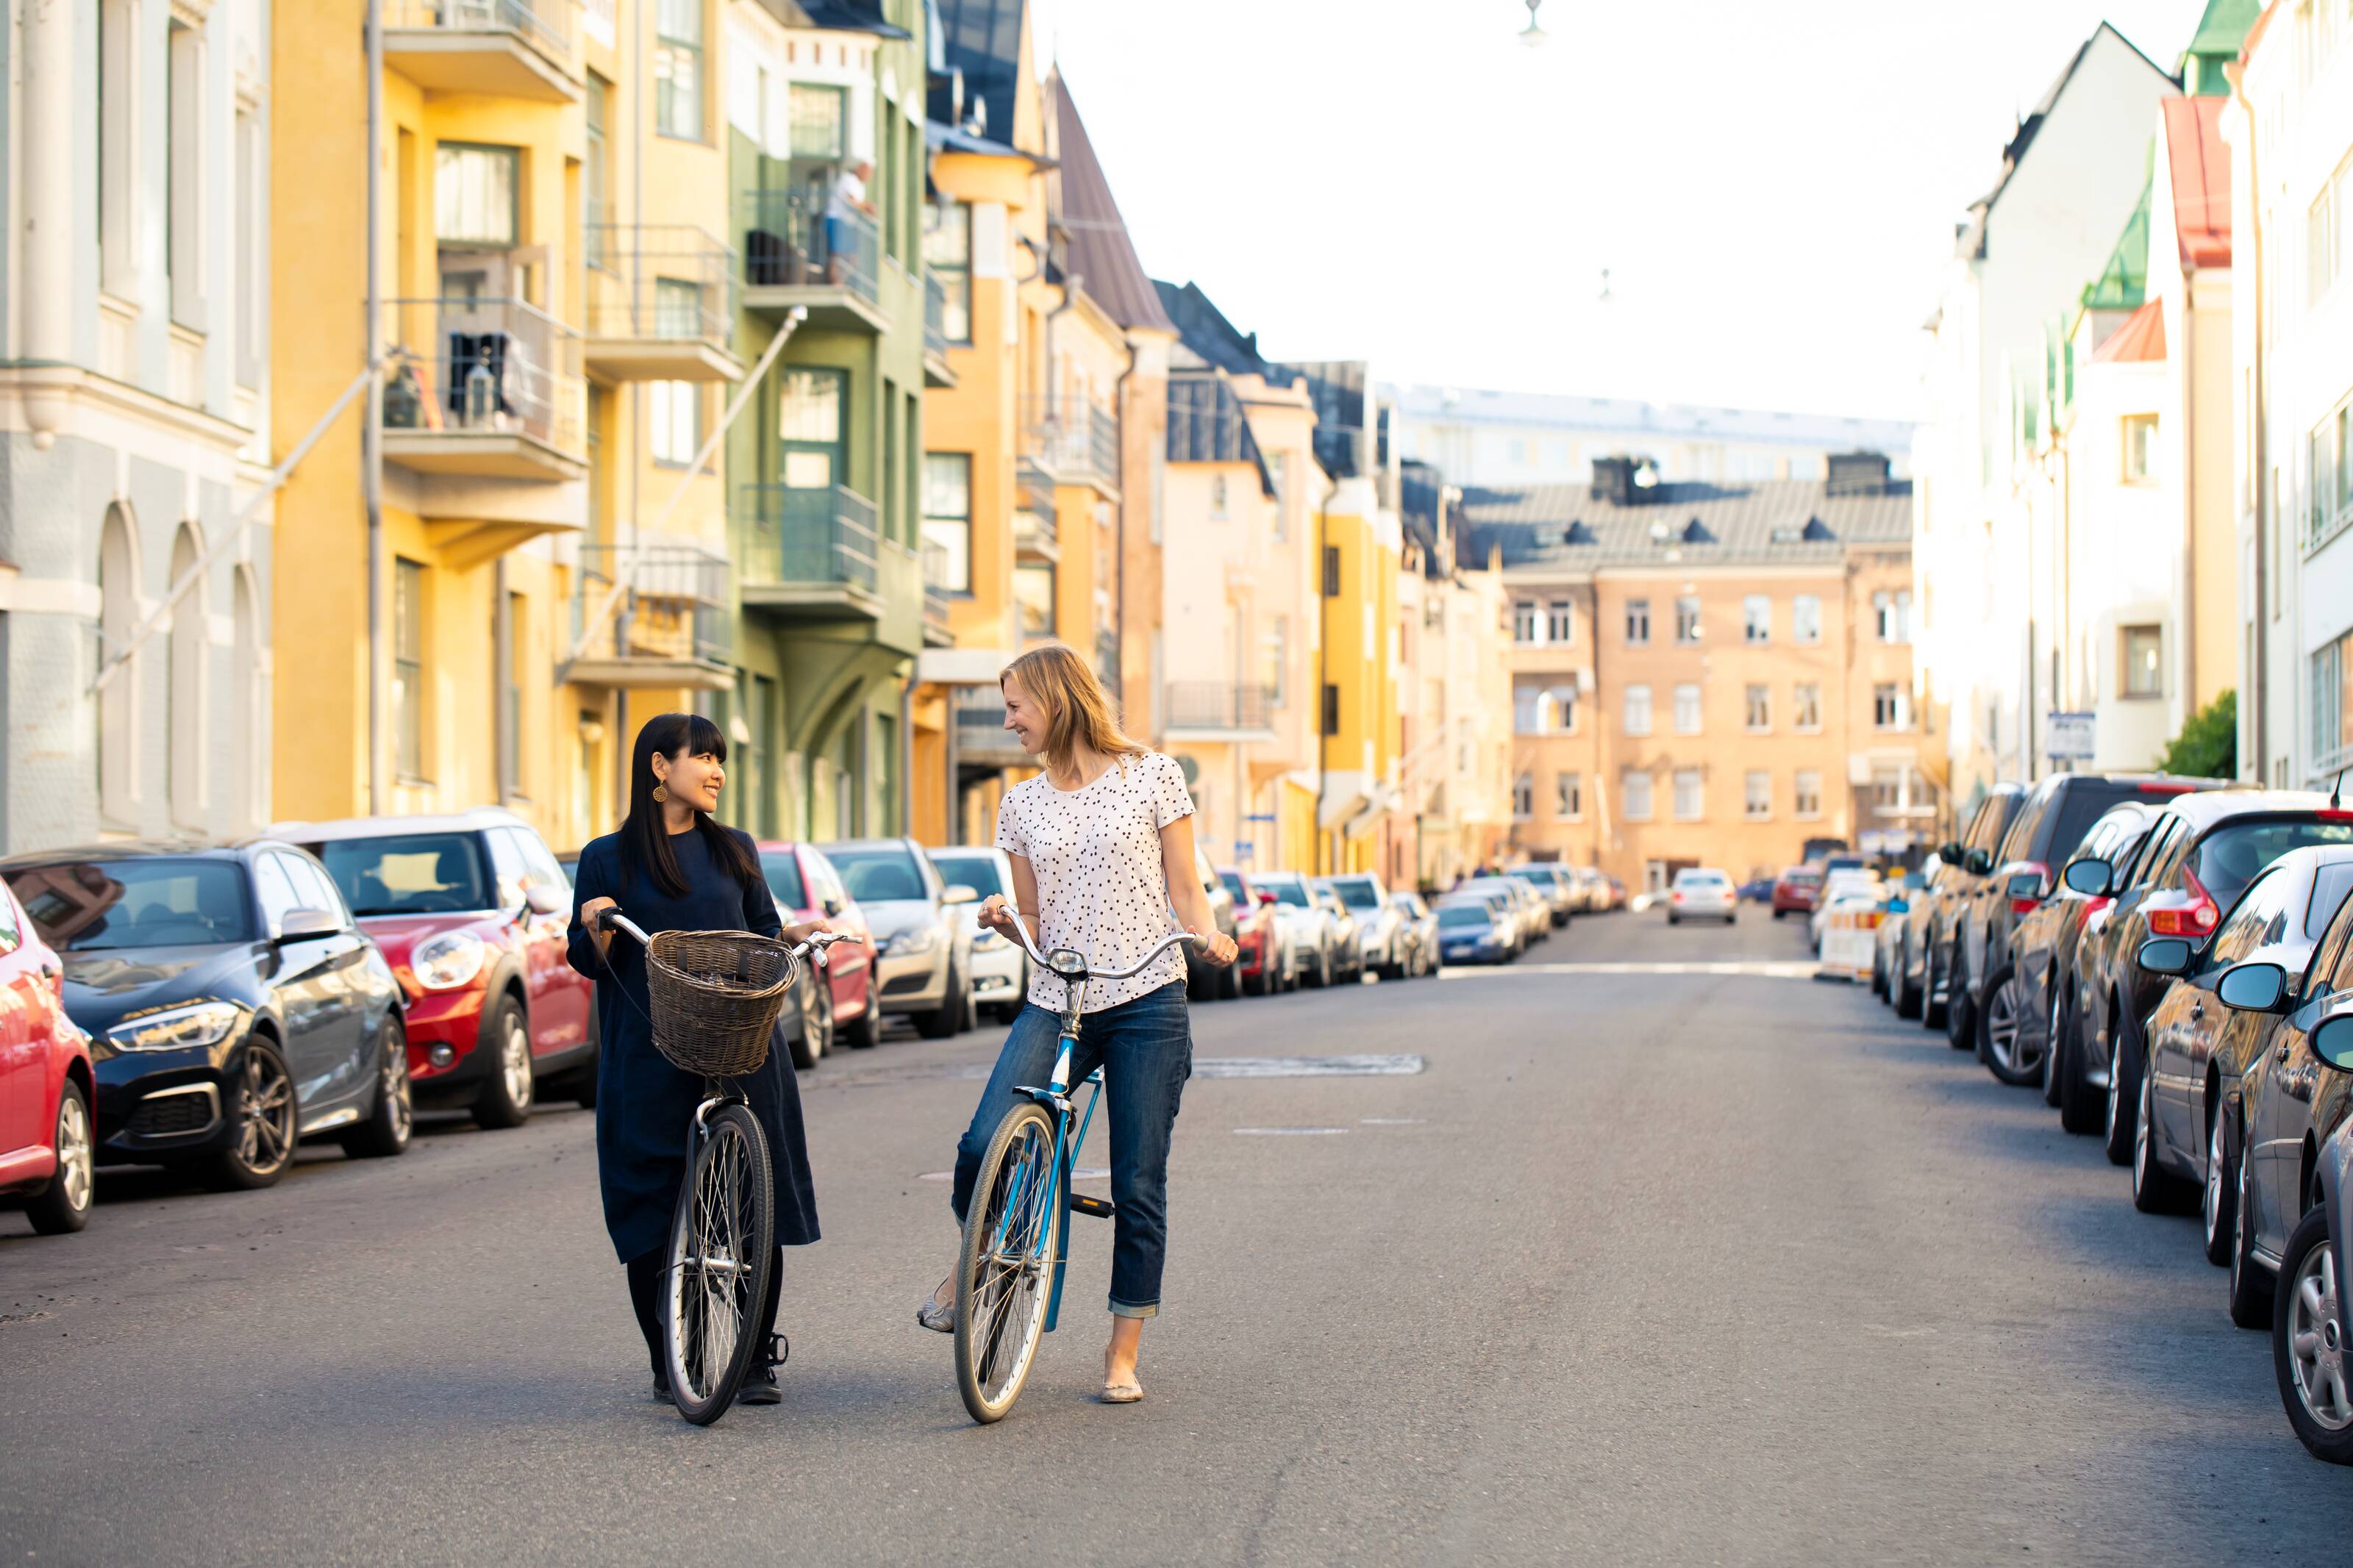 Women cycling on a colorful street.